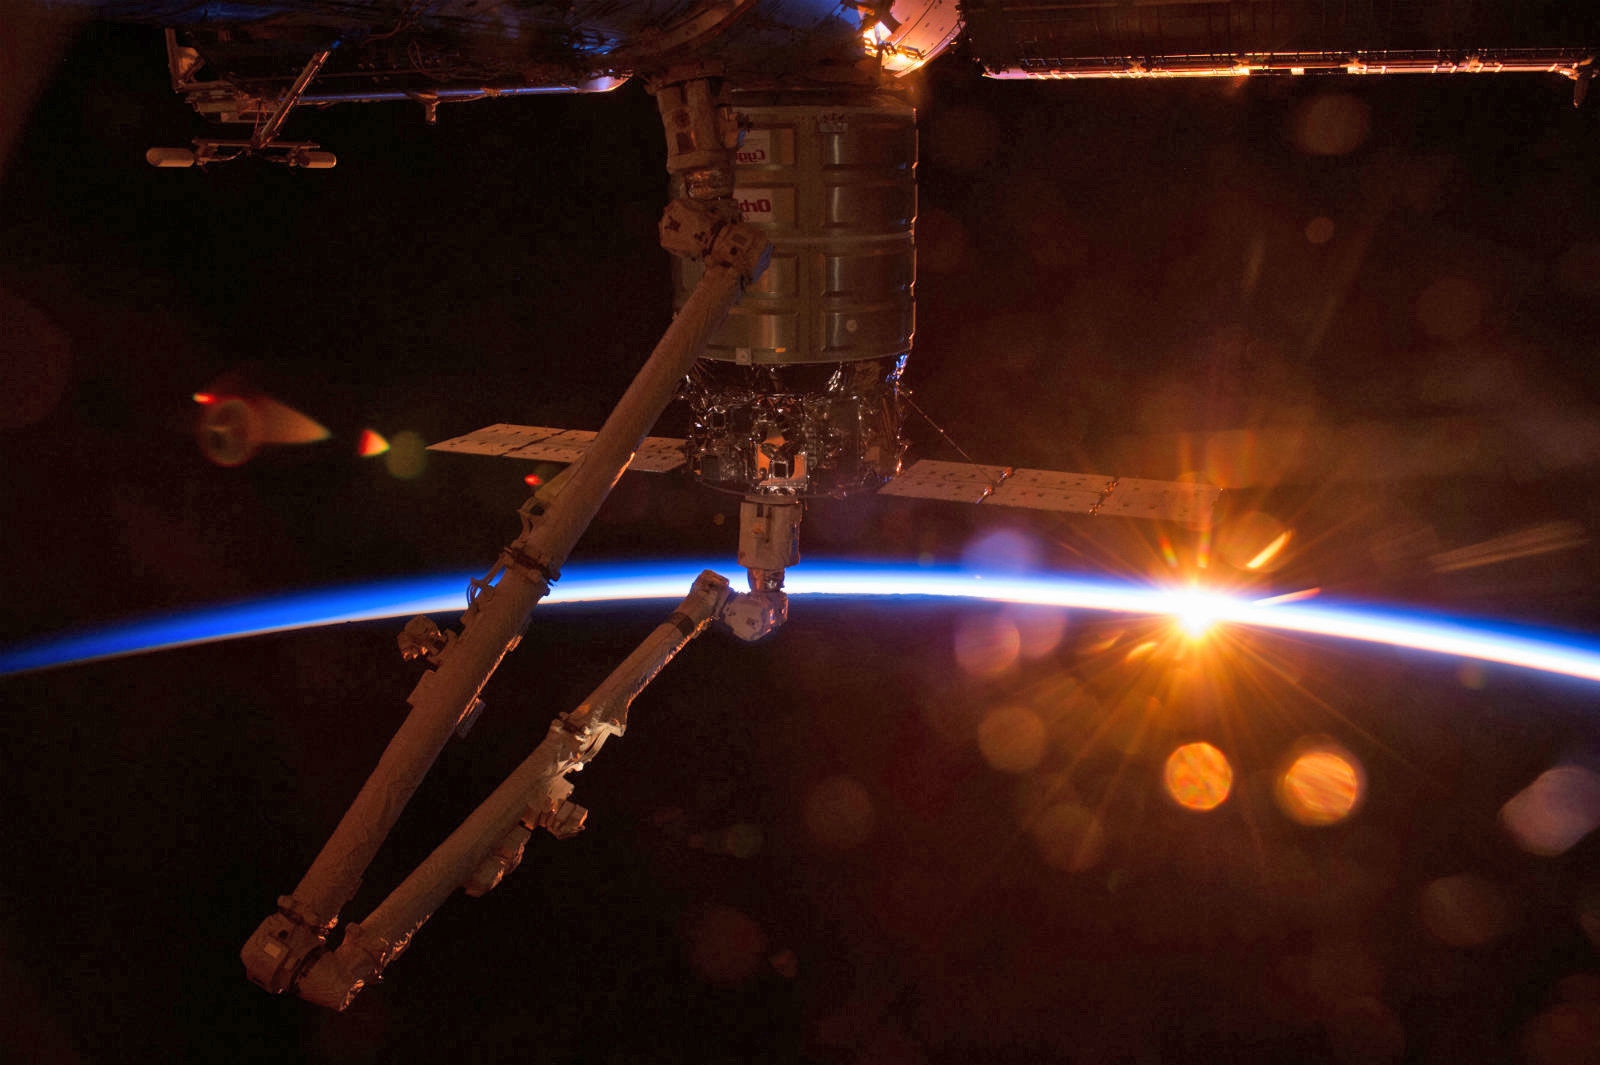 NASA opens the International Space Station to commercial ventures | DeviceDaily.com